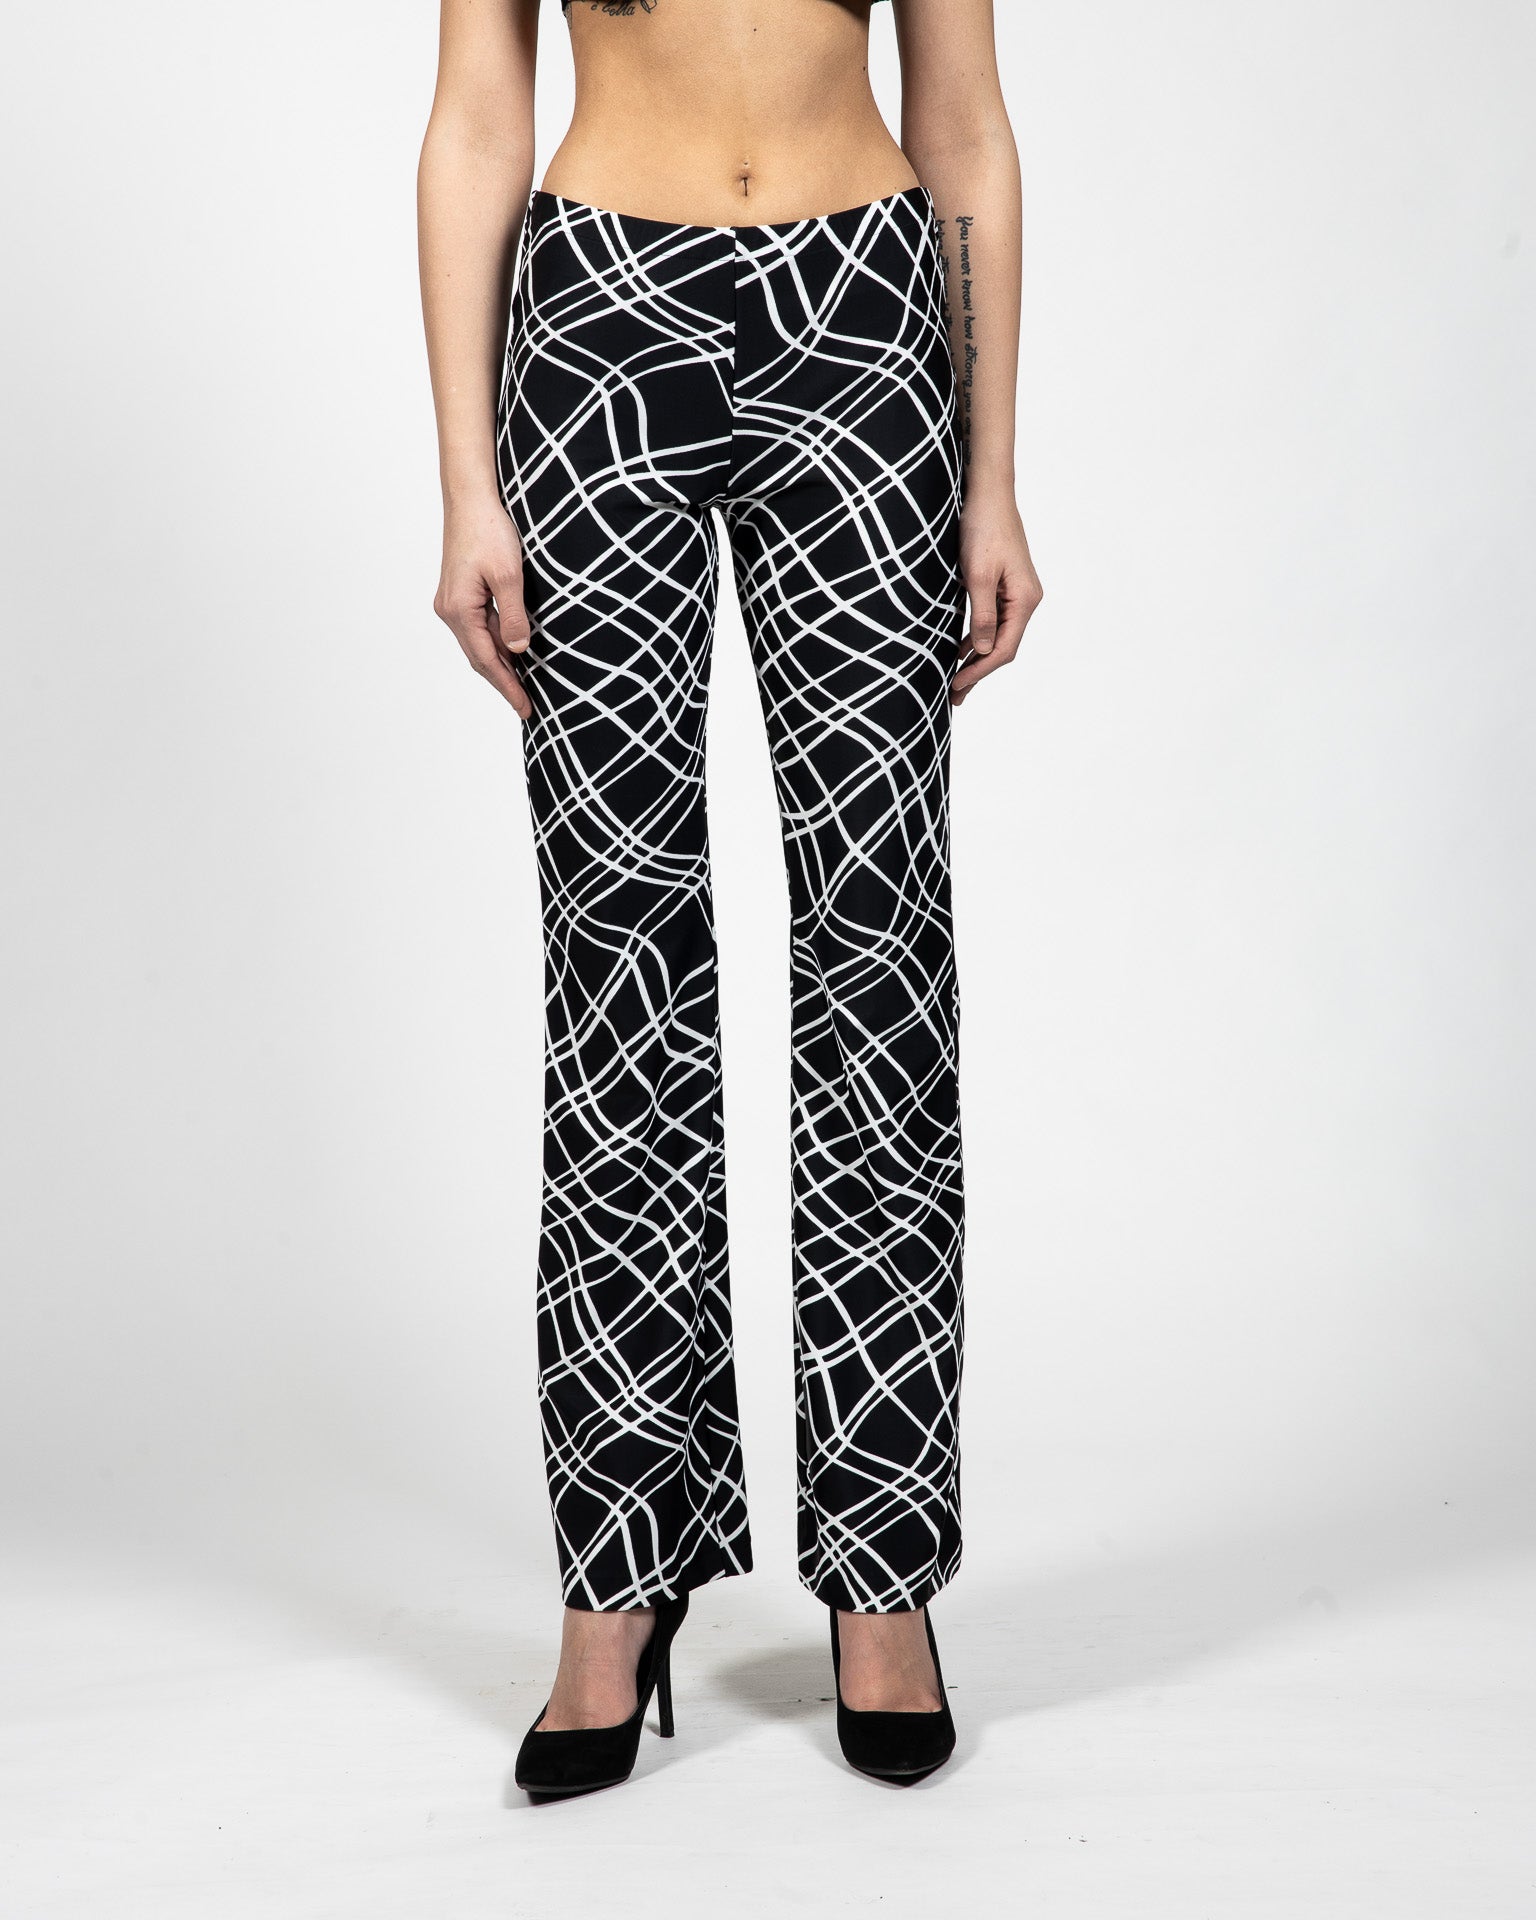 Printed Cropped Bra Top, Shorts And Pants With Waist Bands - Front View of Pants - Samuel Vartan